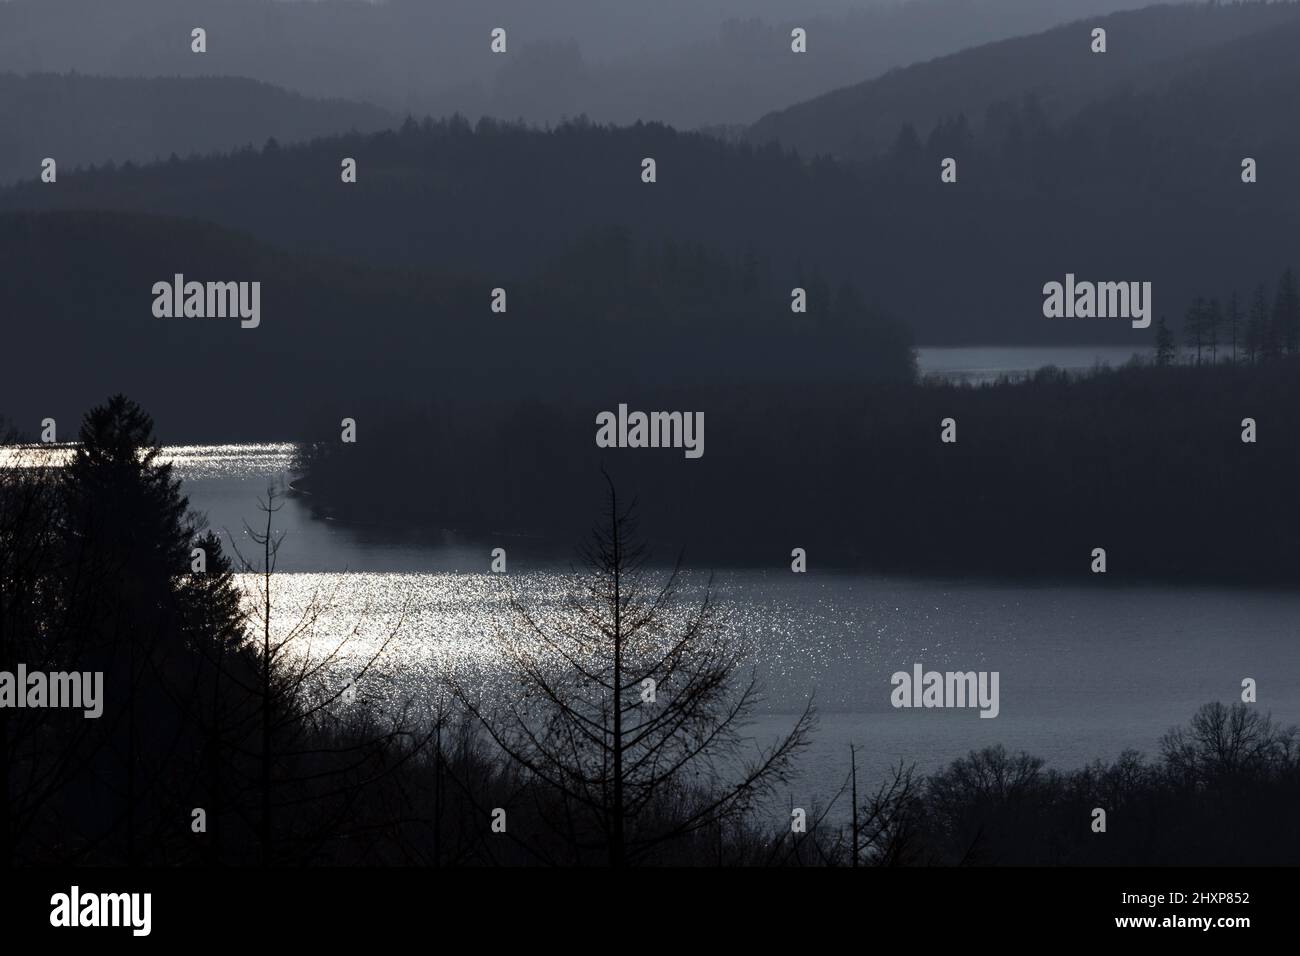 the bigge lake in the sauerland germany in an evening setting Stock Photo